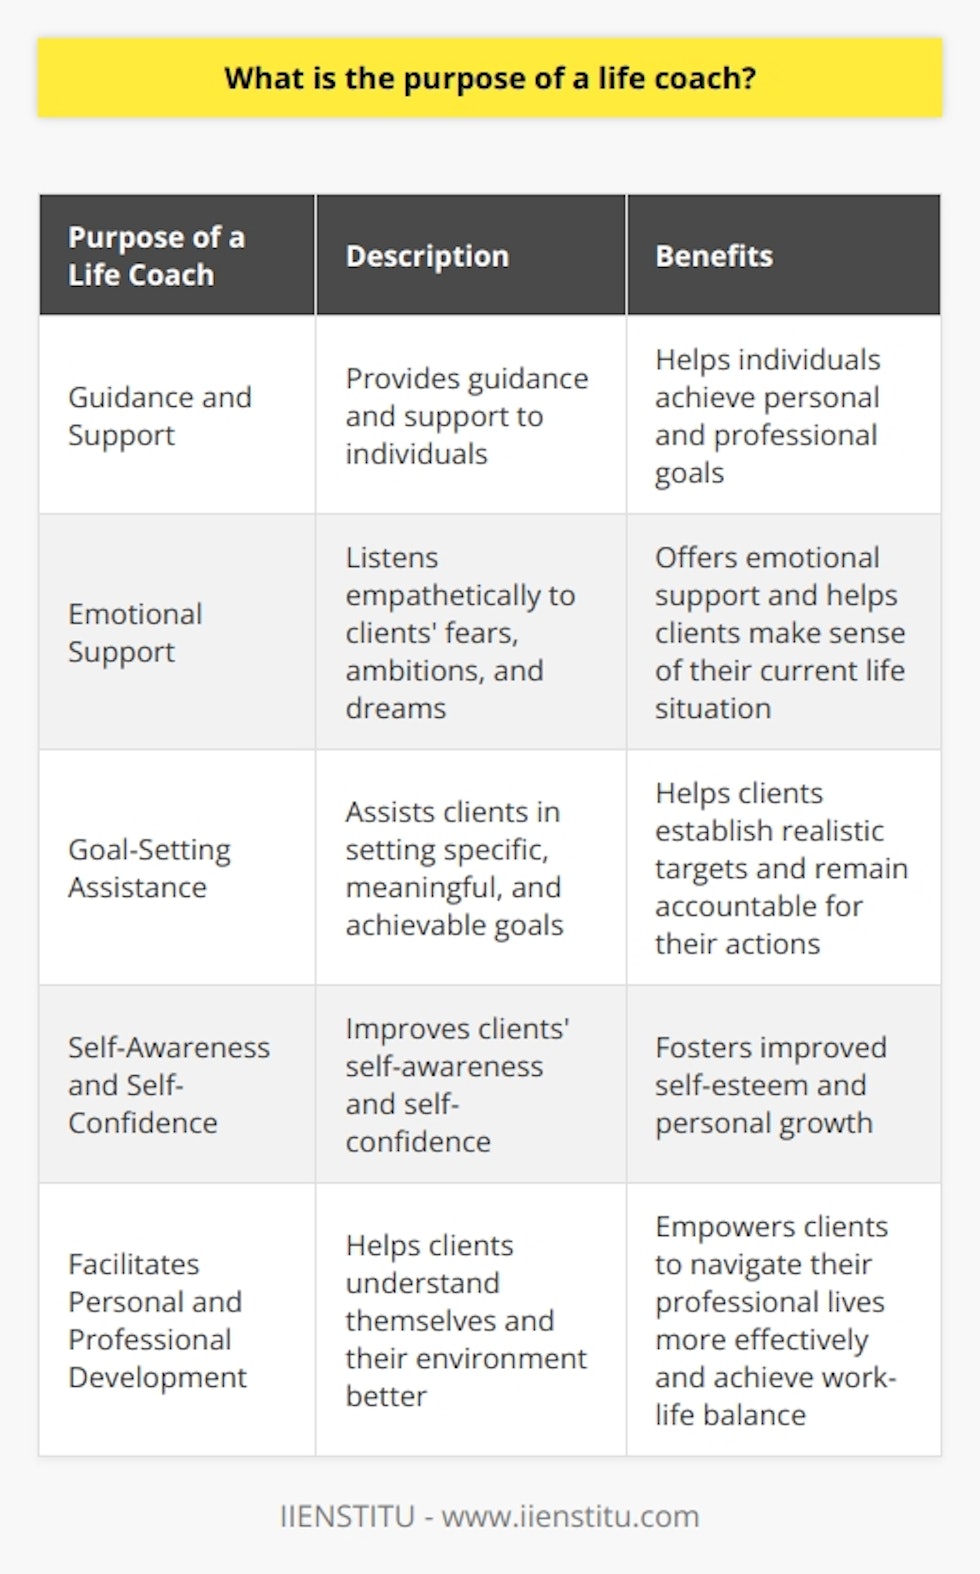 The purpose of a life coach is to provide guidance and support to individuals, helping them achieve their personal and professional goals. They offer emotional support by listening empathetically to their clients' fears, ambitions, and dreams. Through active listening, life coaches help clients make sense of their present life situation.One of the main roles of a life coach is to assist clients in setting specific, meaningful, and achievable goals. They help their clients establish realistic targets and guide them on the journey to achieving these goals. Throughout this process, life coaches ensure their clients remain accountable for their actions.In addition, life coaches aim to improve their clients' self-awareness and self-confidence. They work on helping clients understand themselves better, focusing on their strengths while addressing their weaknesses. By doing so, life coaches foster improved self-esteem and personal growth.Life coaches also play a vital role in facilitating personal and professional development. They help their clients gain a better understanding of themselves and their environment, empowering them to navigate their professional lives more effectively. Life coaches assist in mitigating work-related stress and encourage a positive work-life balance.In summary, the purpose of a life coach encompasses promoting emotional well-being, fostering self-understanding and confidence, facilitating personal and professional growth, guiding goal-setting, and providing support in achieving those goals. With their expertise and motivation, life coaches help individuals achieve optimal life fulfillment.